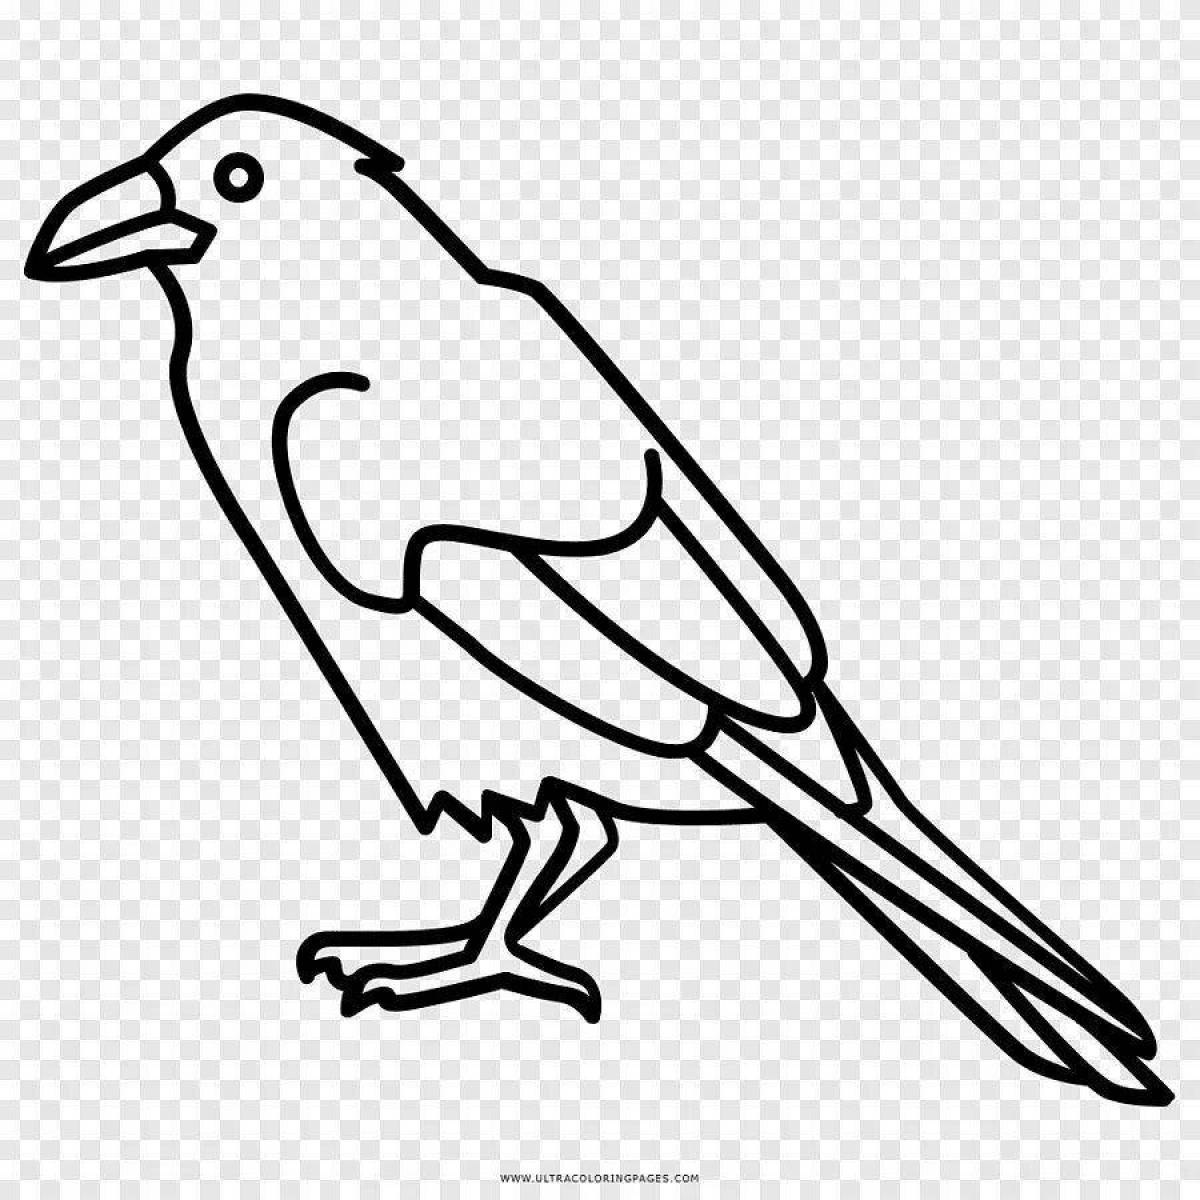 An interesting crow coloring page for 3-4 year olds